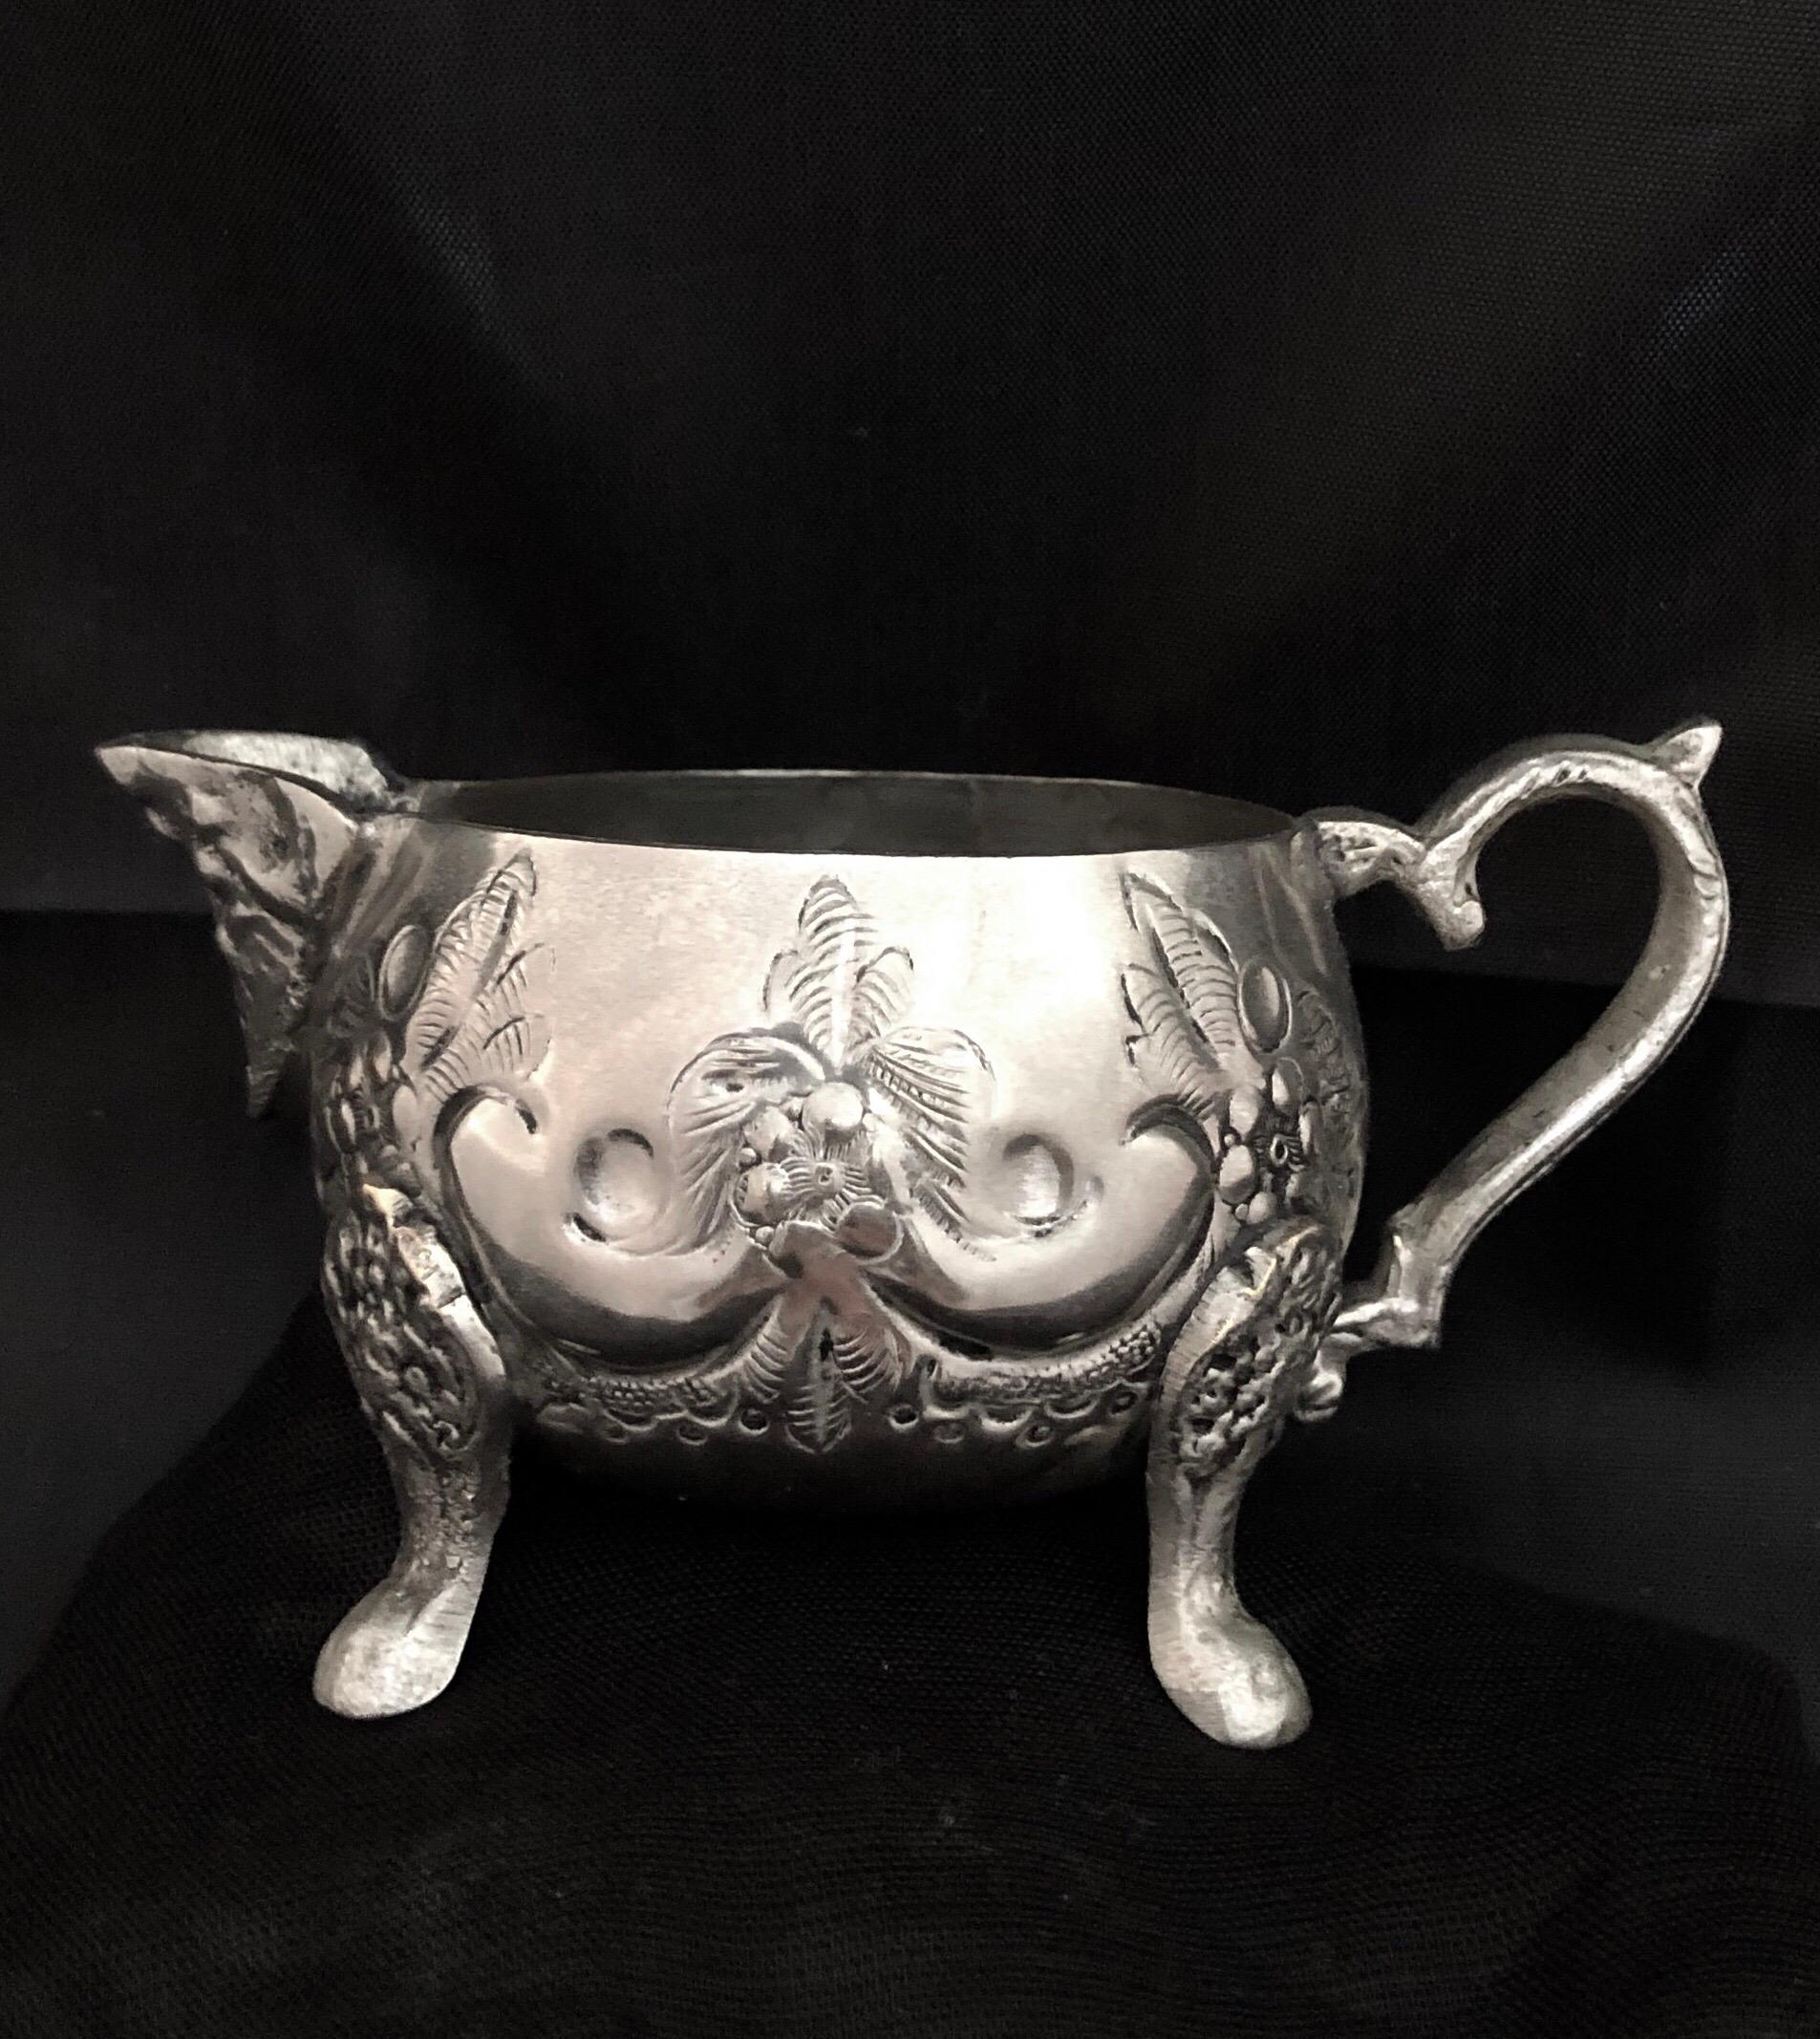 This lovely antique Moroccan silver tea sugar creamer comes from the ancient city of Fes, Morocco. Used for many generations to serve sugar (but also perfect for cream) this small round silver pitcher is beautifully decorated in repoussée and